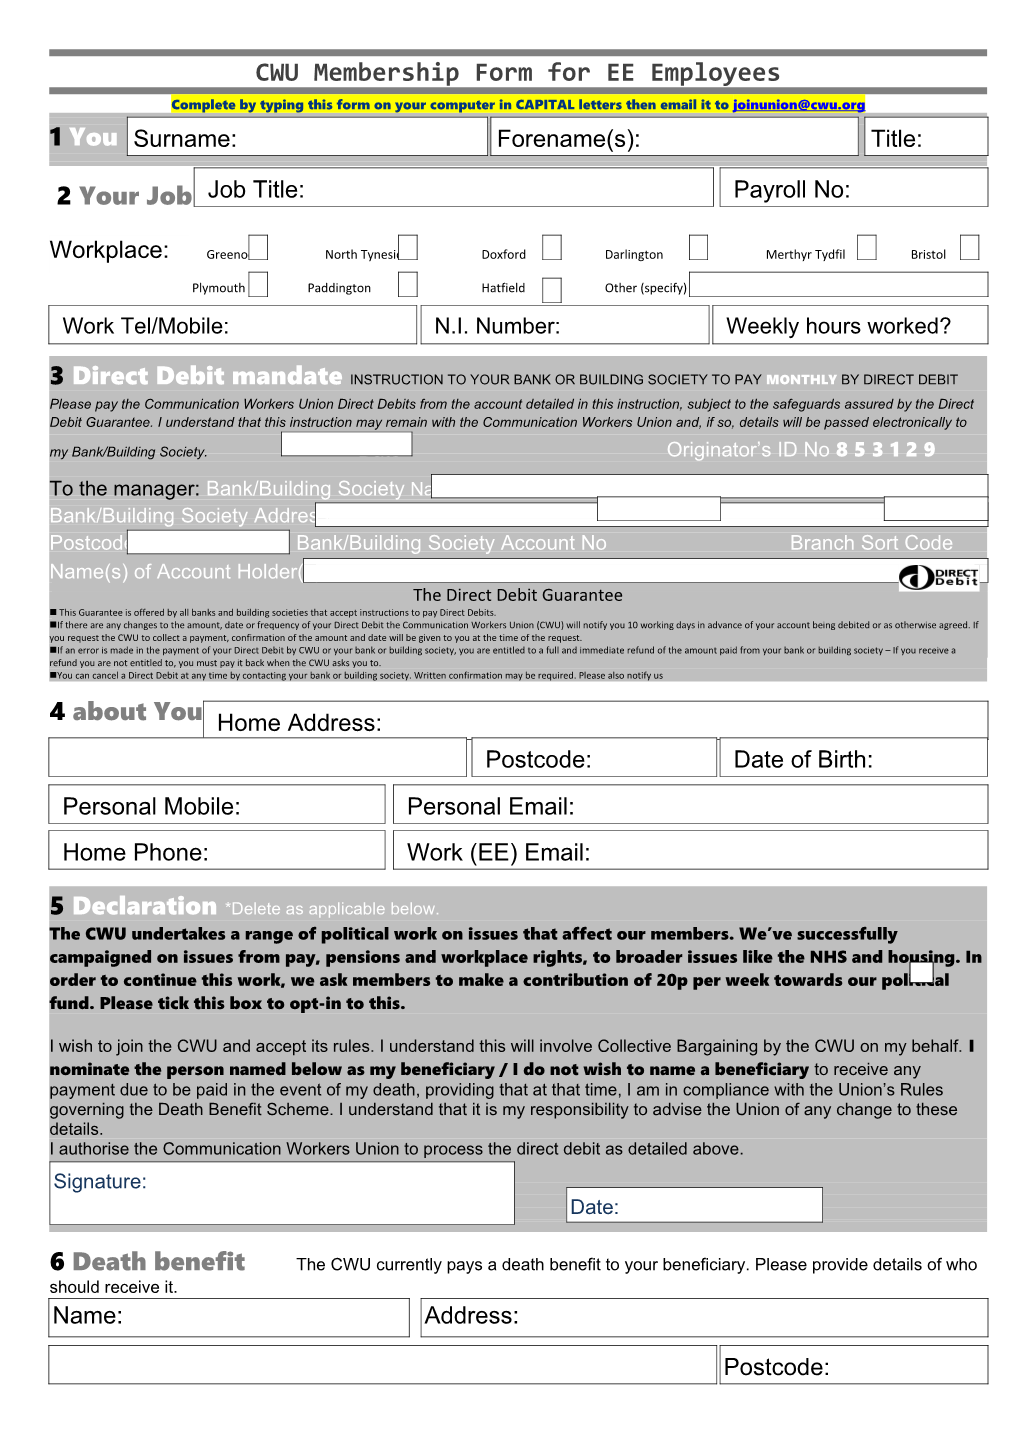 CWU Membership Form for EE Employees